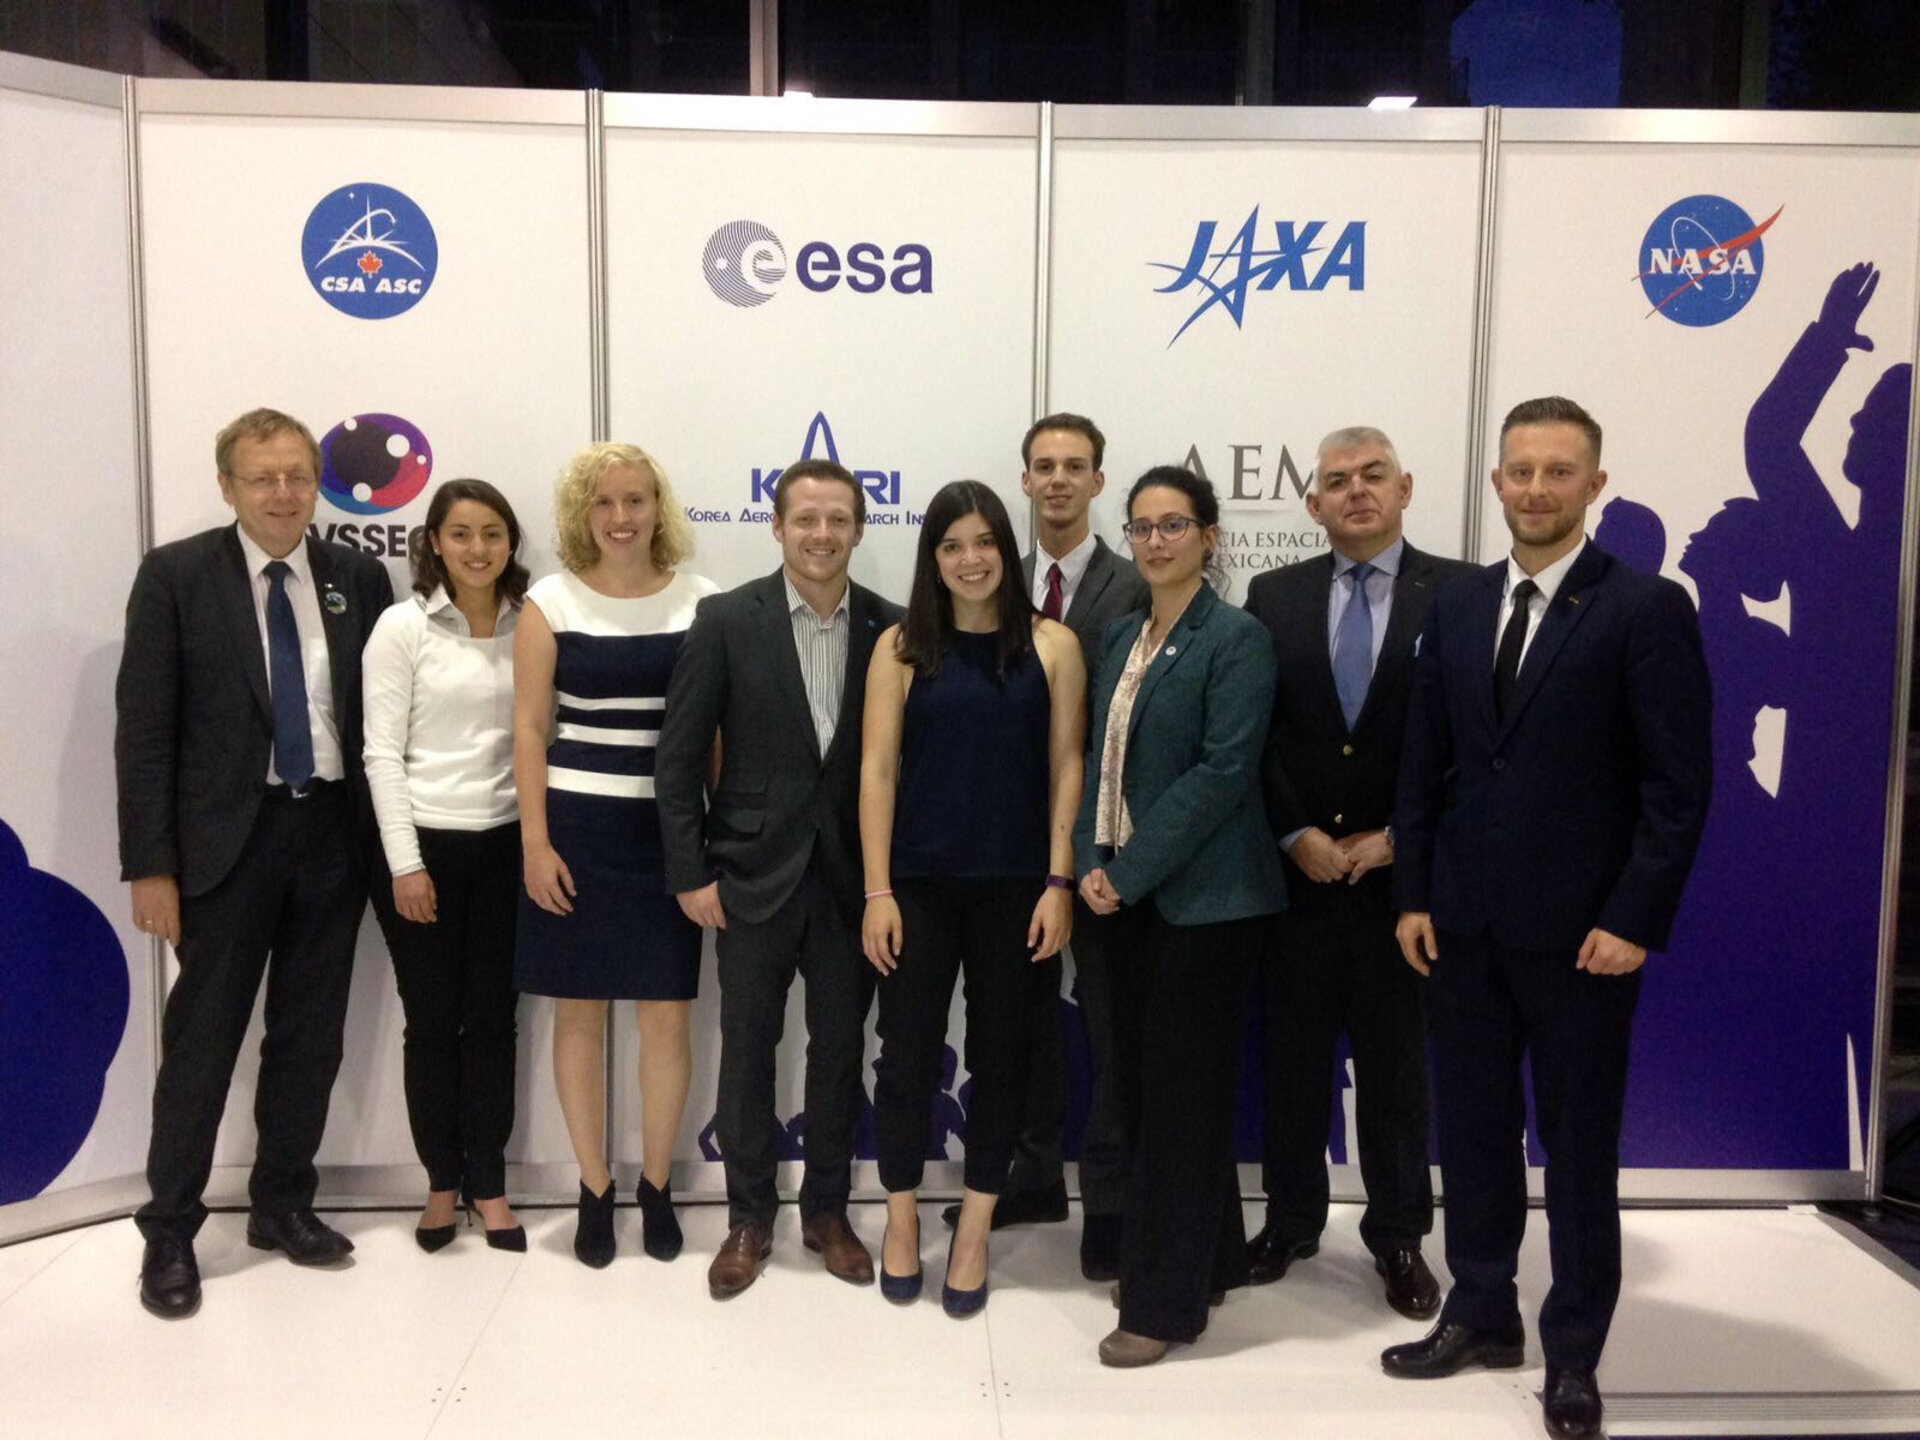 ESA Education staff and sponsored students meet with ESA's Director General